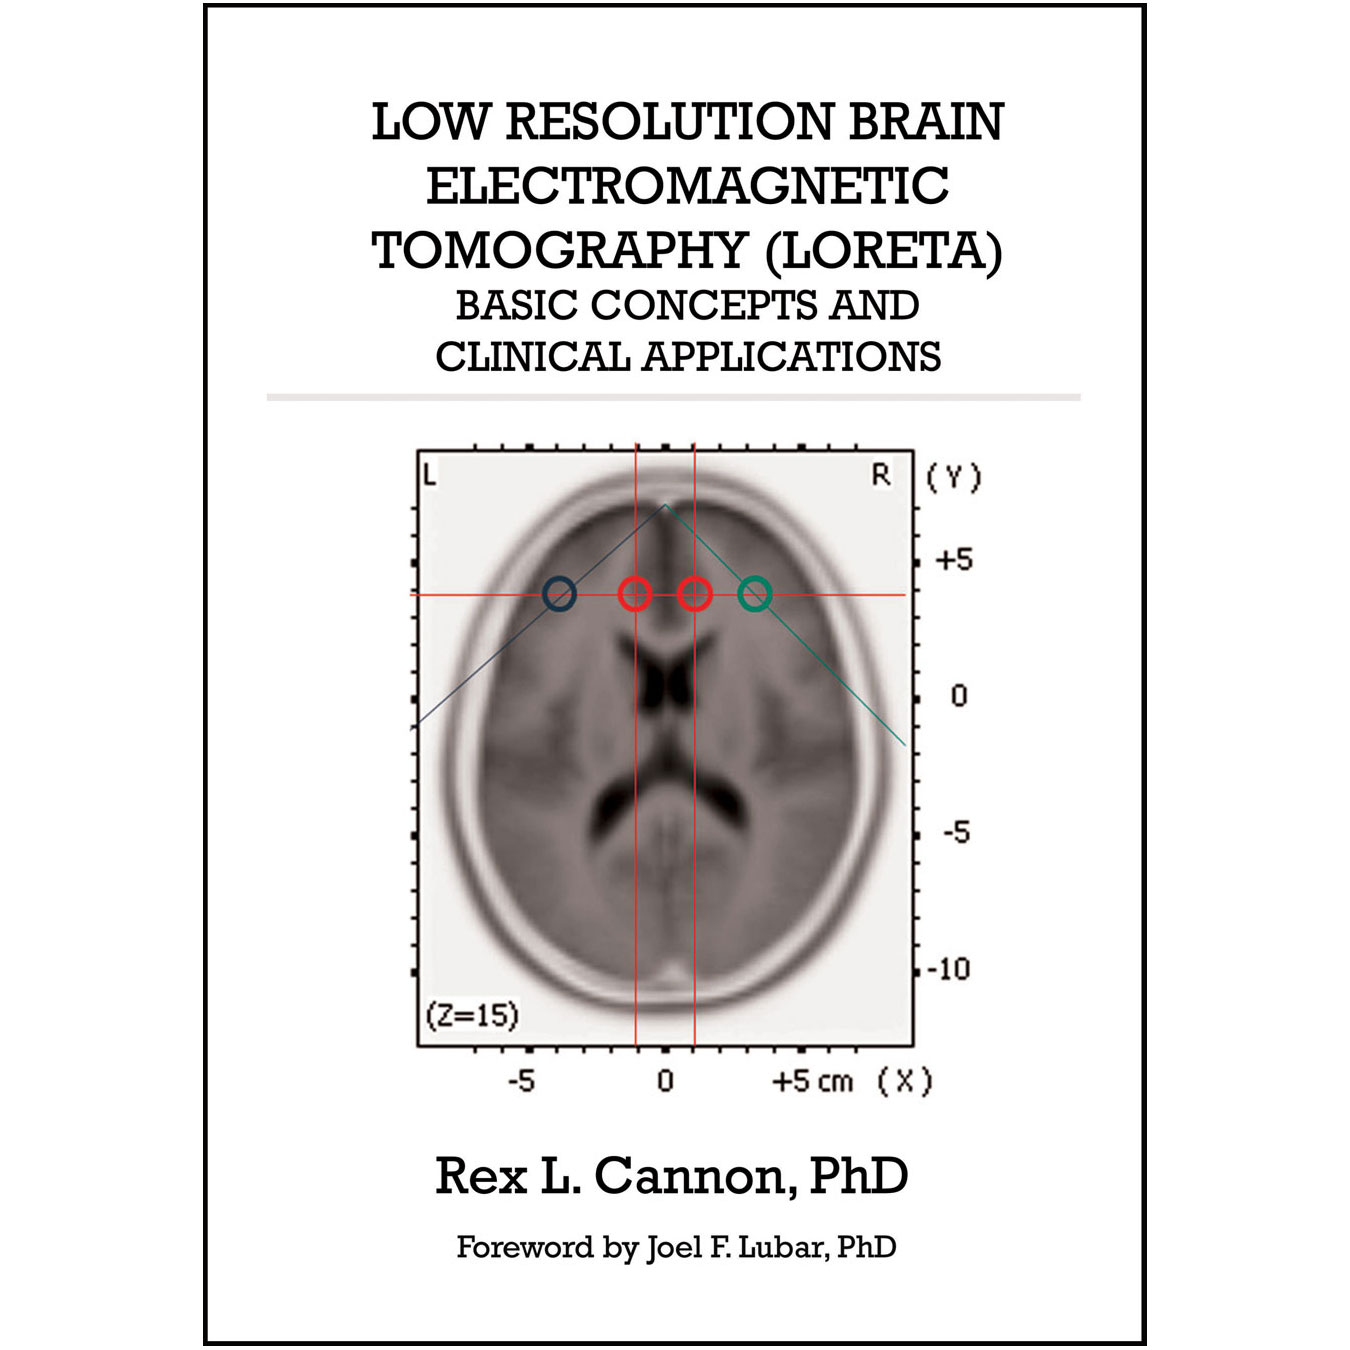 Low Resolution Brain Electromagnetic Tomography (front cover)